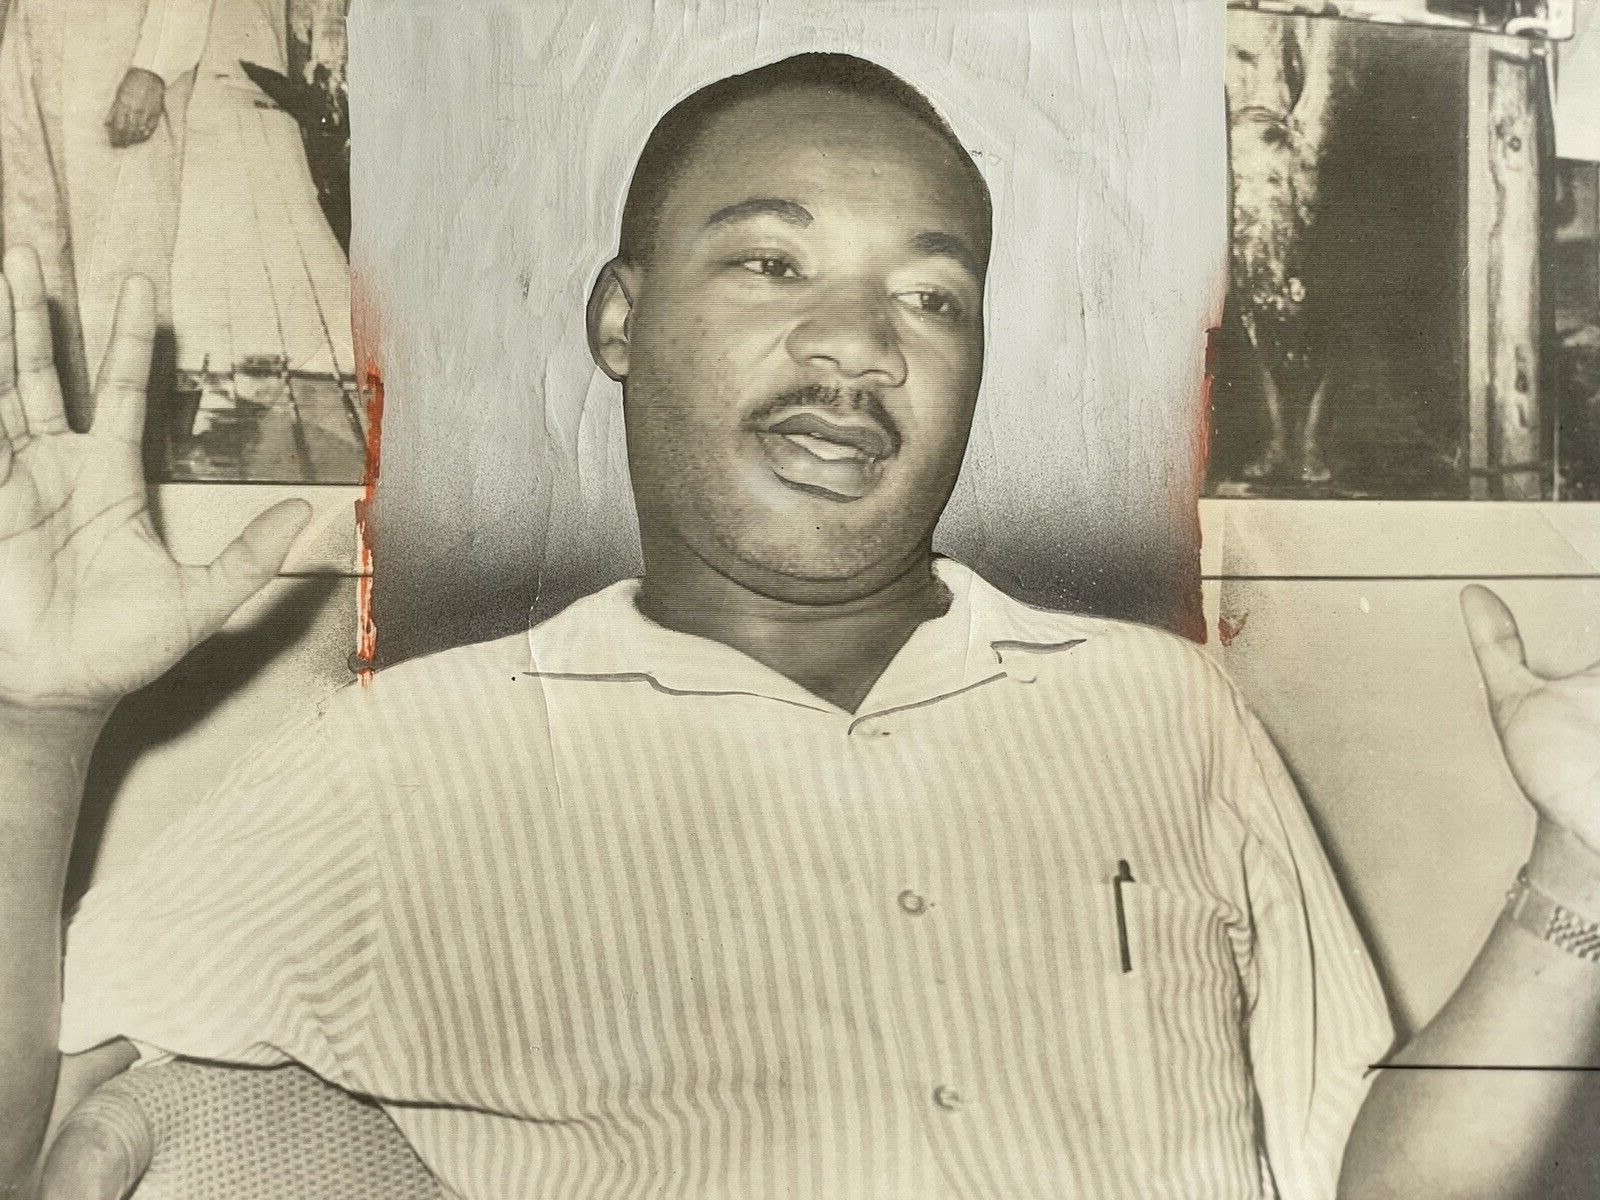 Martin Luther King Civil Rights Press Photograph 1964 #historyinpieces